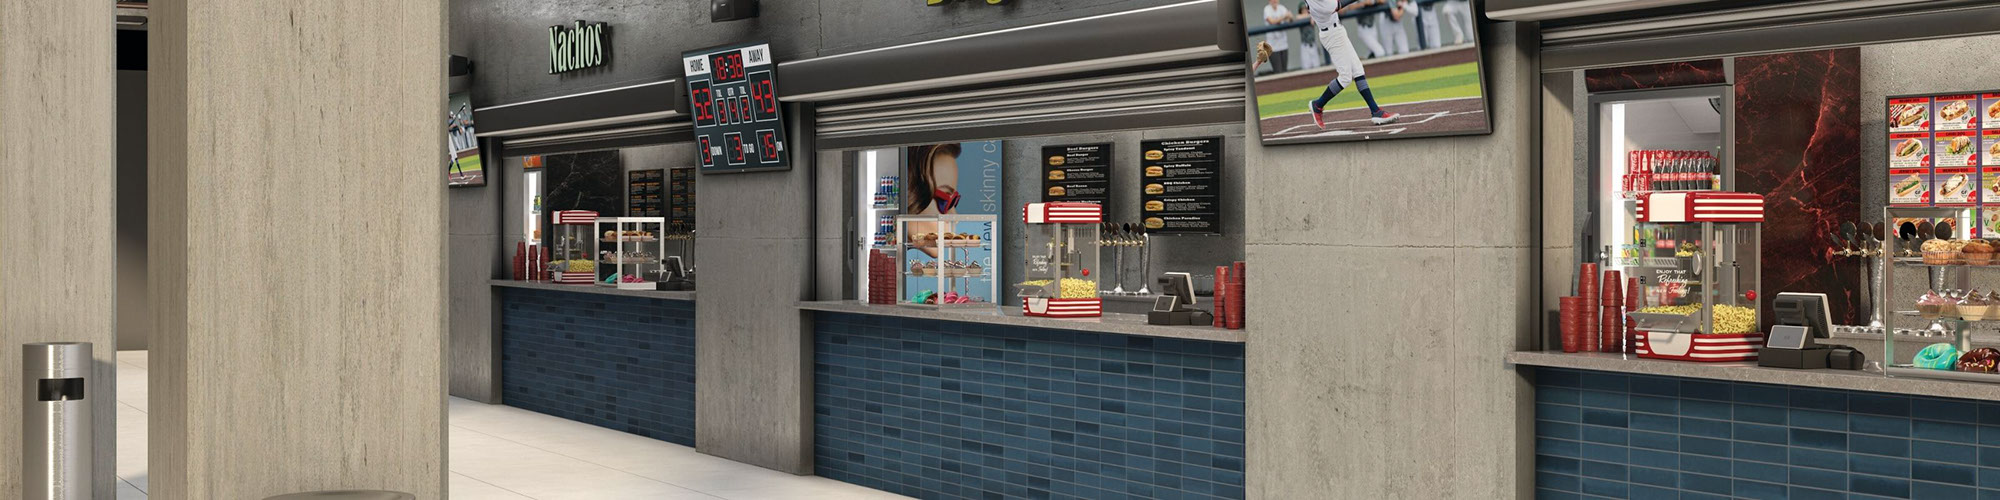 Baseball stadium concession stands with gray quartz countertops, blue subway wall tile, beige floor tile that looks like concrete.